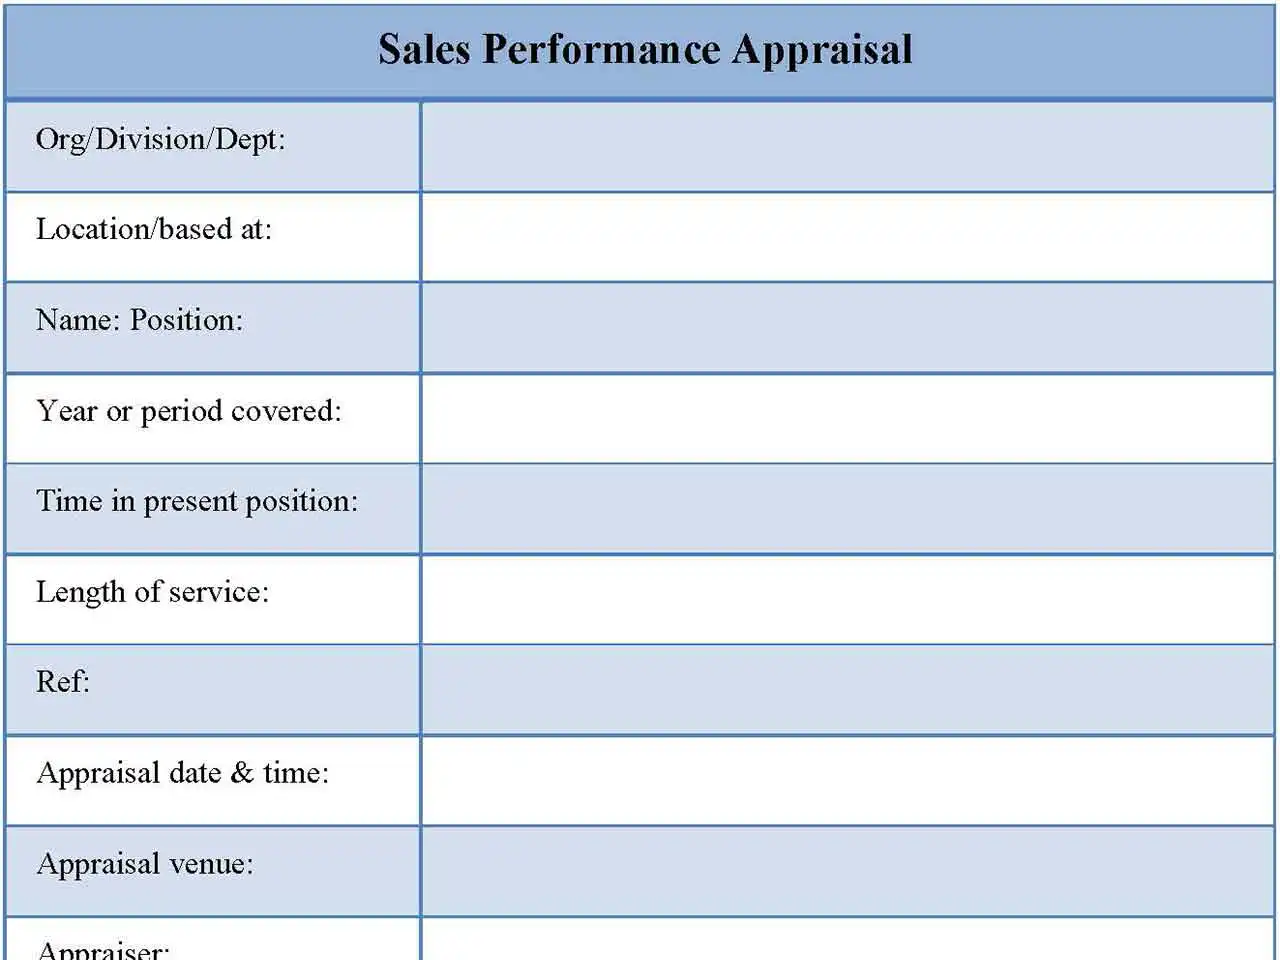 Sales Performance Appraisal Fillable PDF Form And Word Document